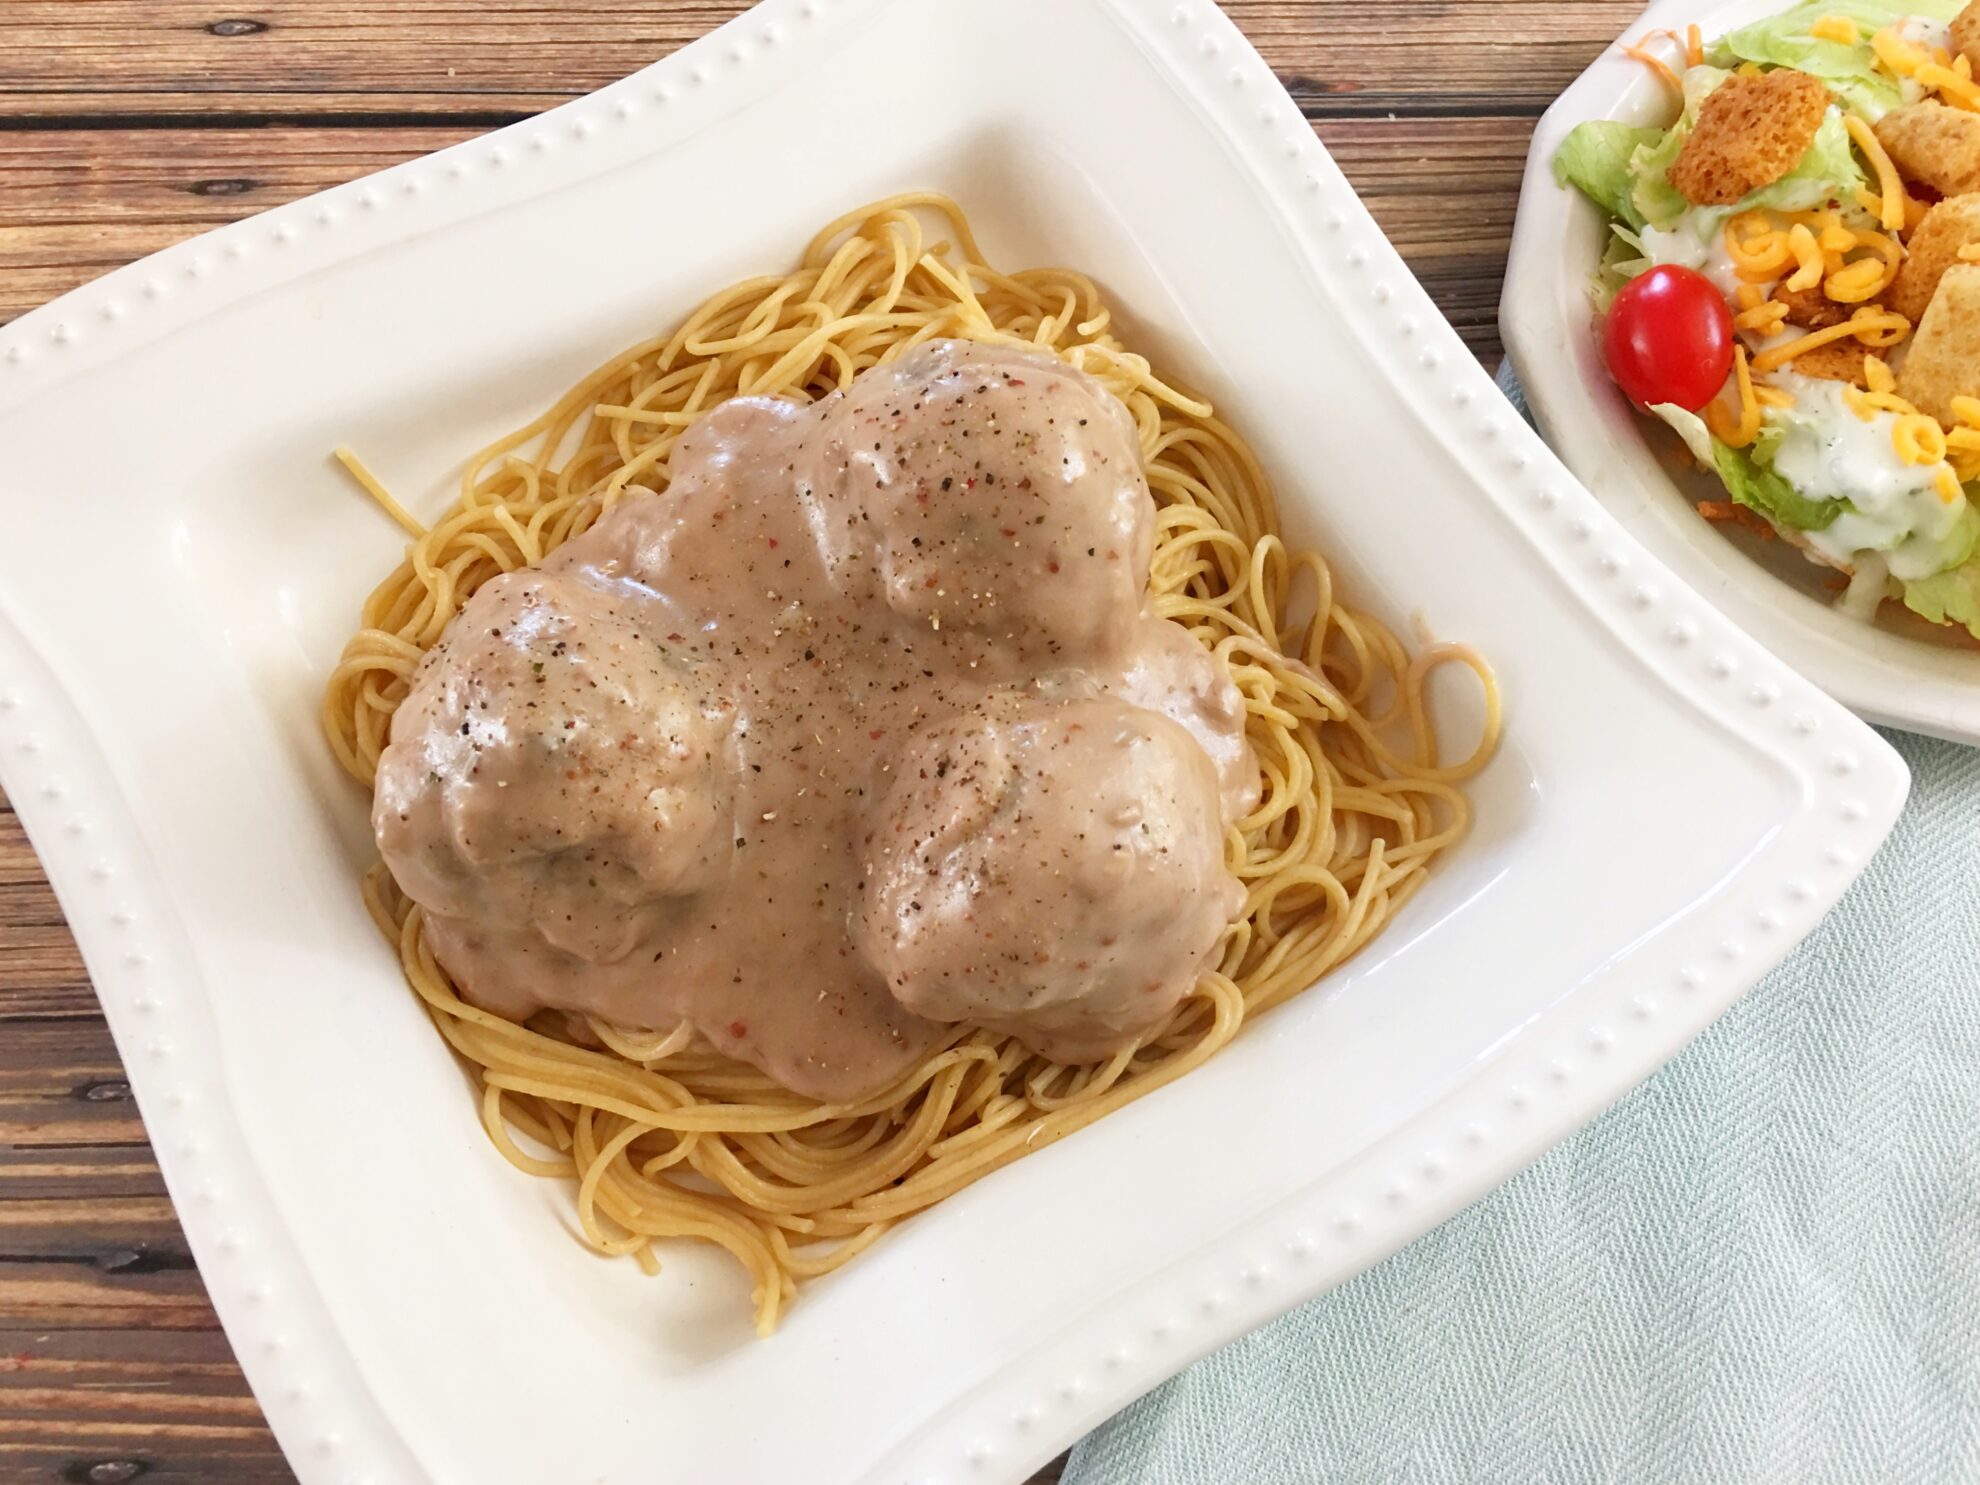 Baked Swedish Meatballs Recipe from $5 Dinners